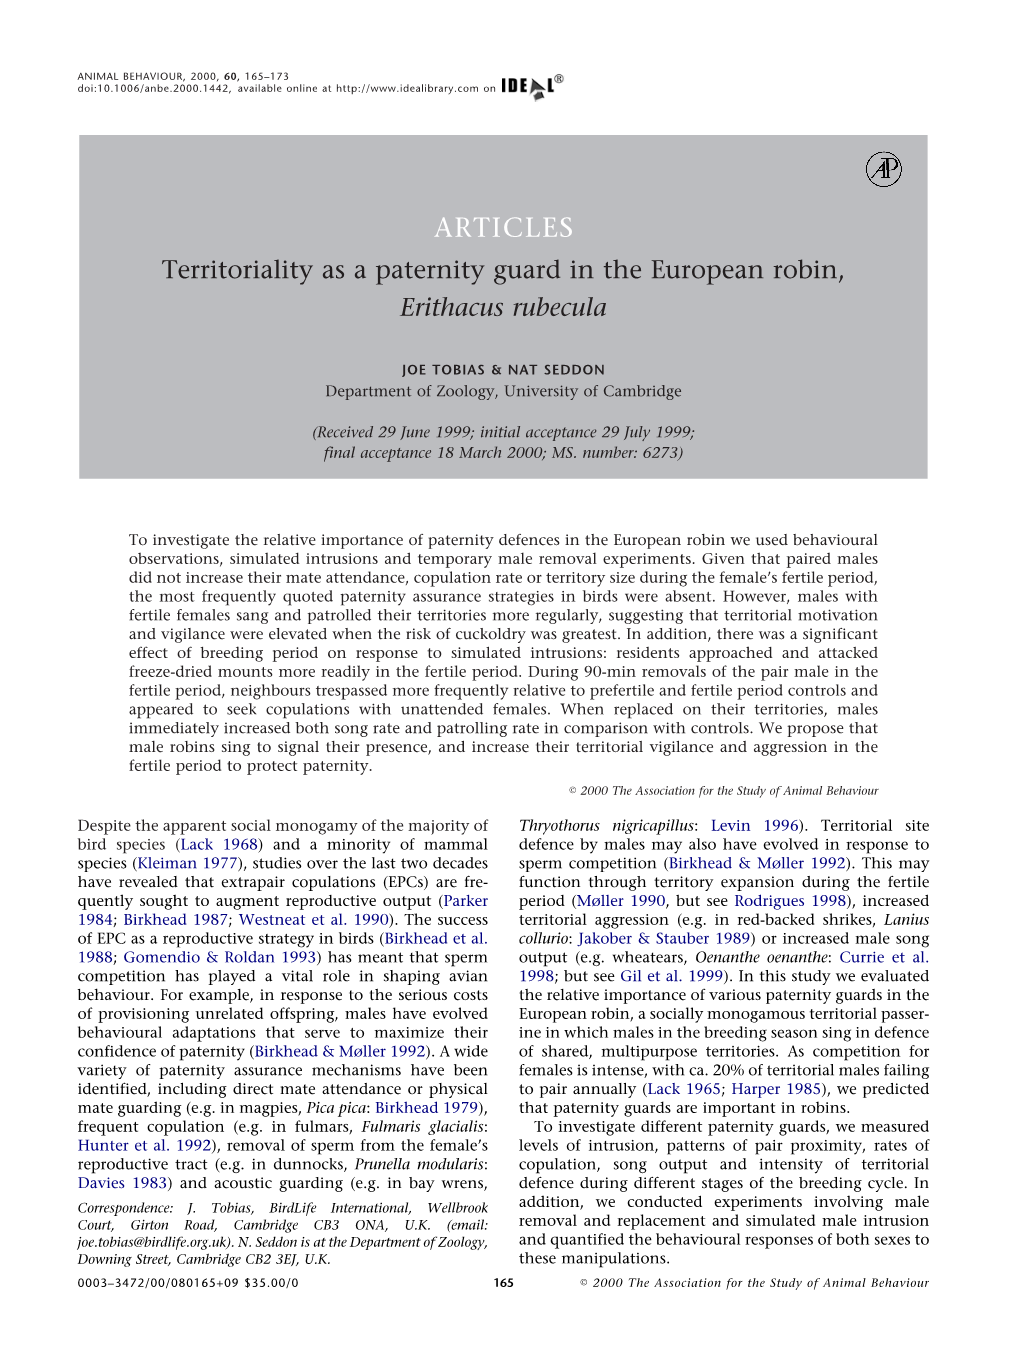 Territoriality As a Paternity Guard in the European Robin, Erithacus Rubecula